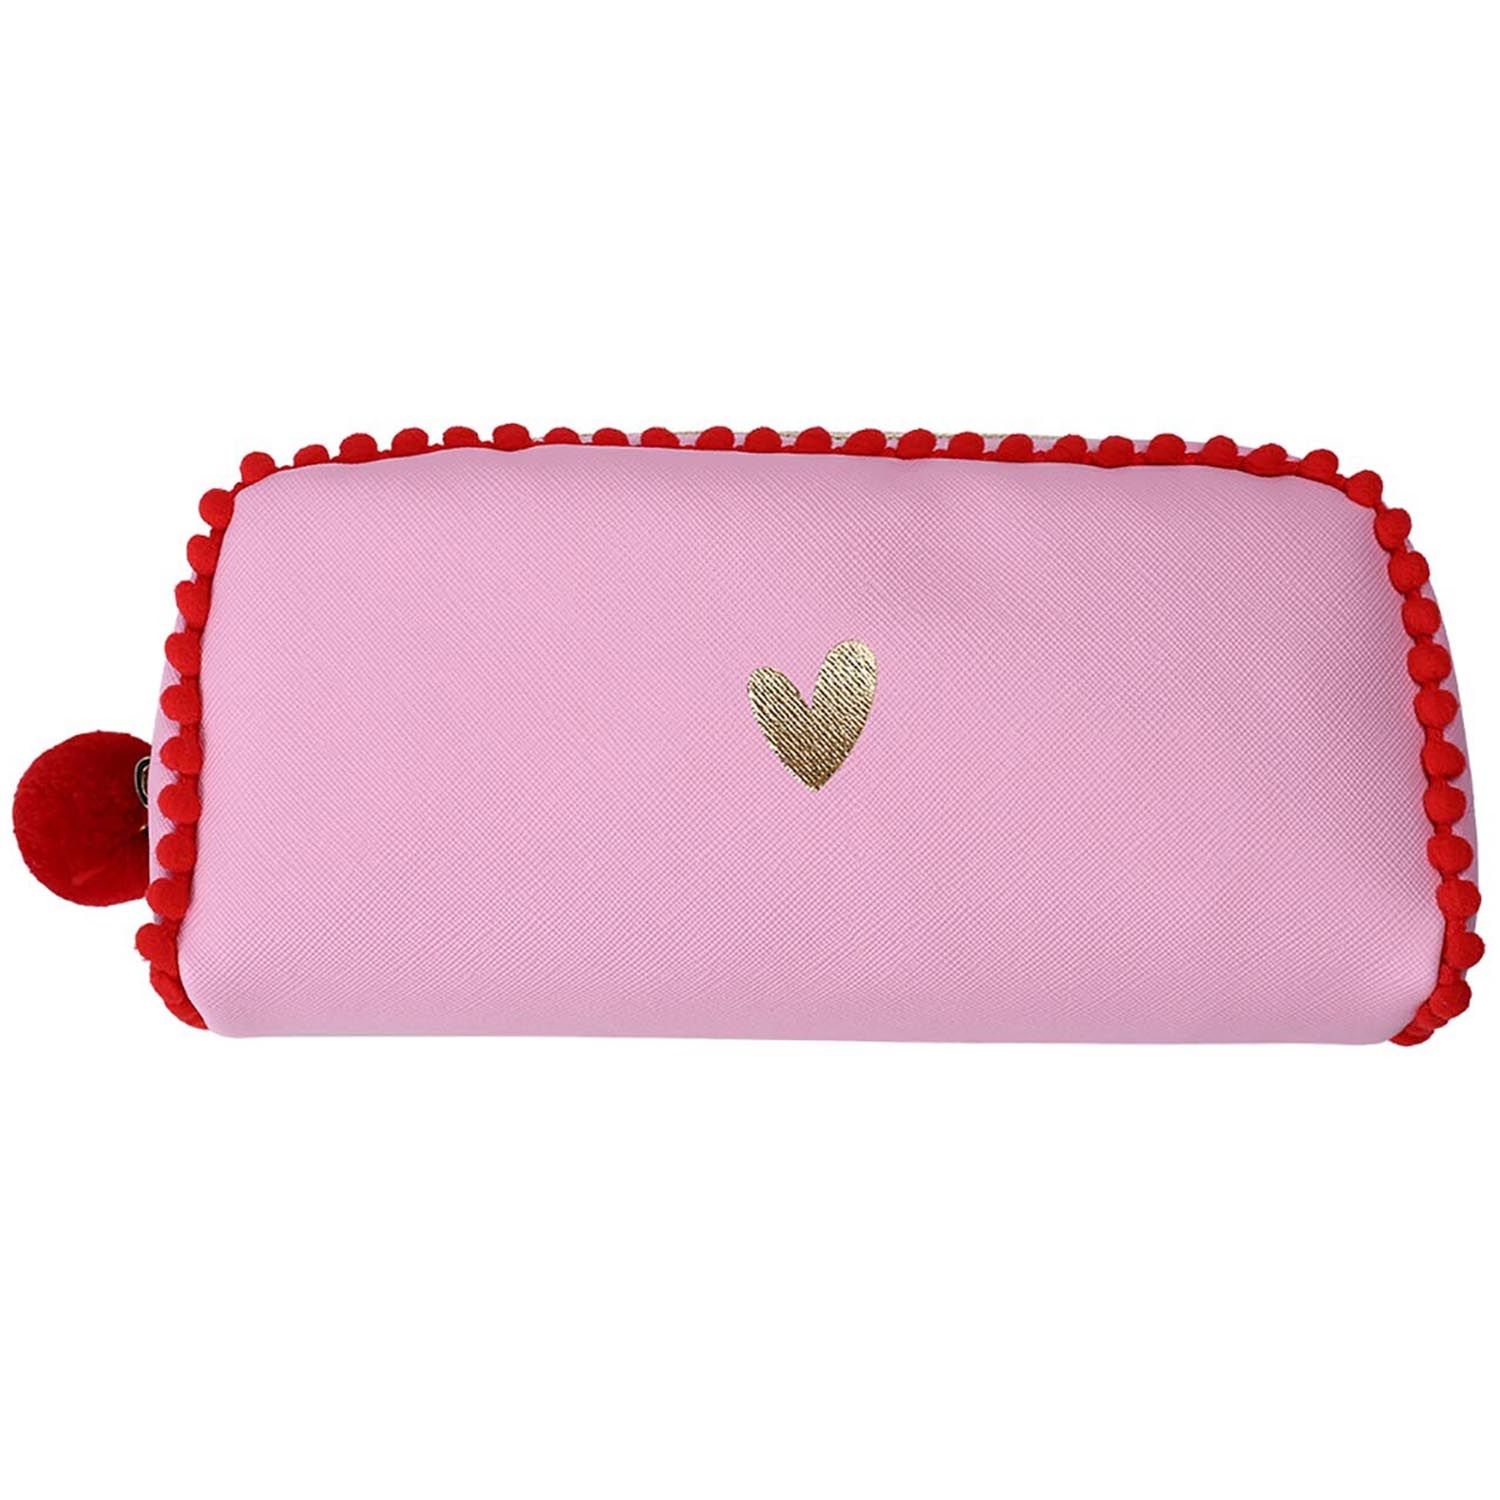 Heart Pencil Case - Pink Image